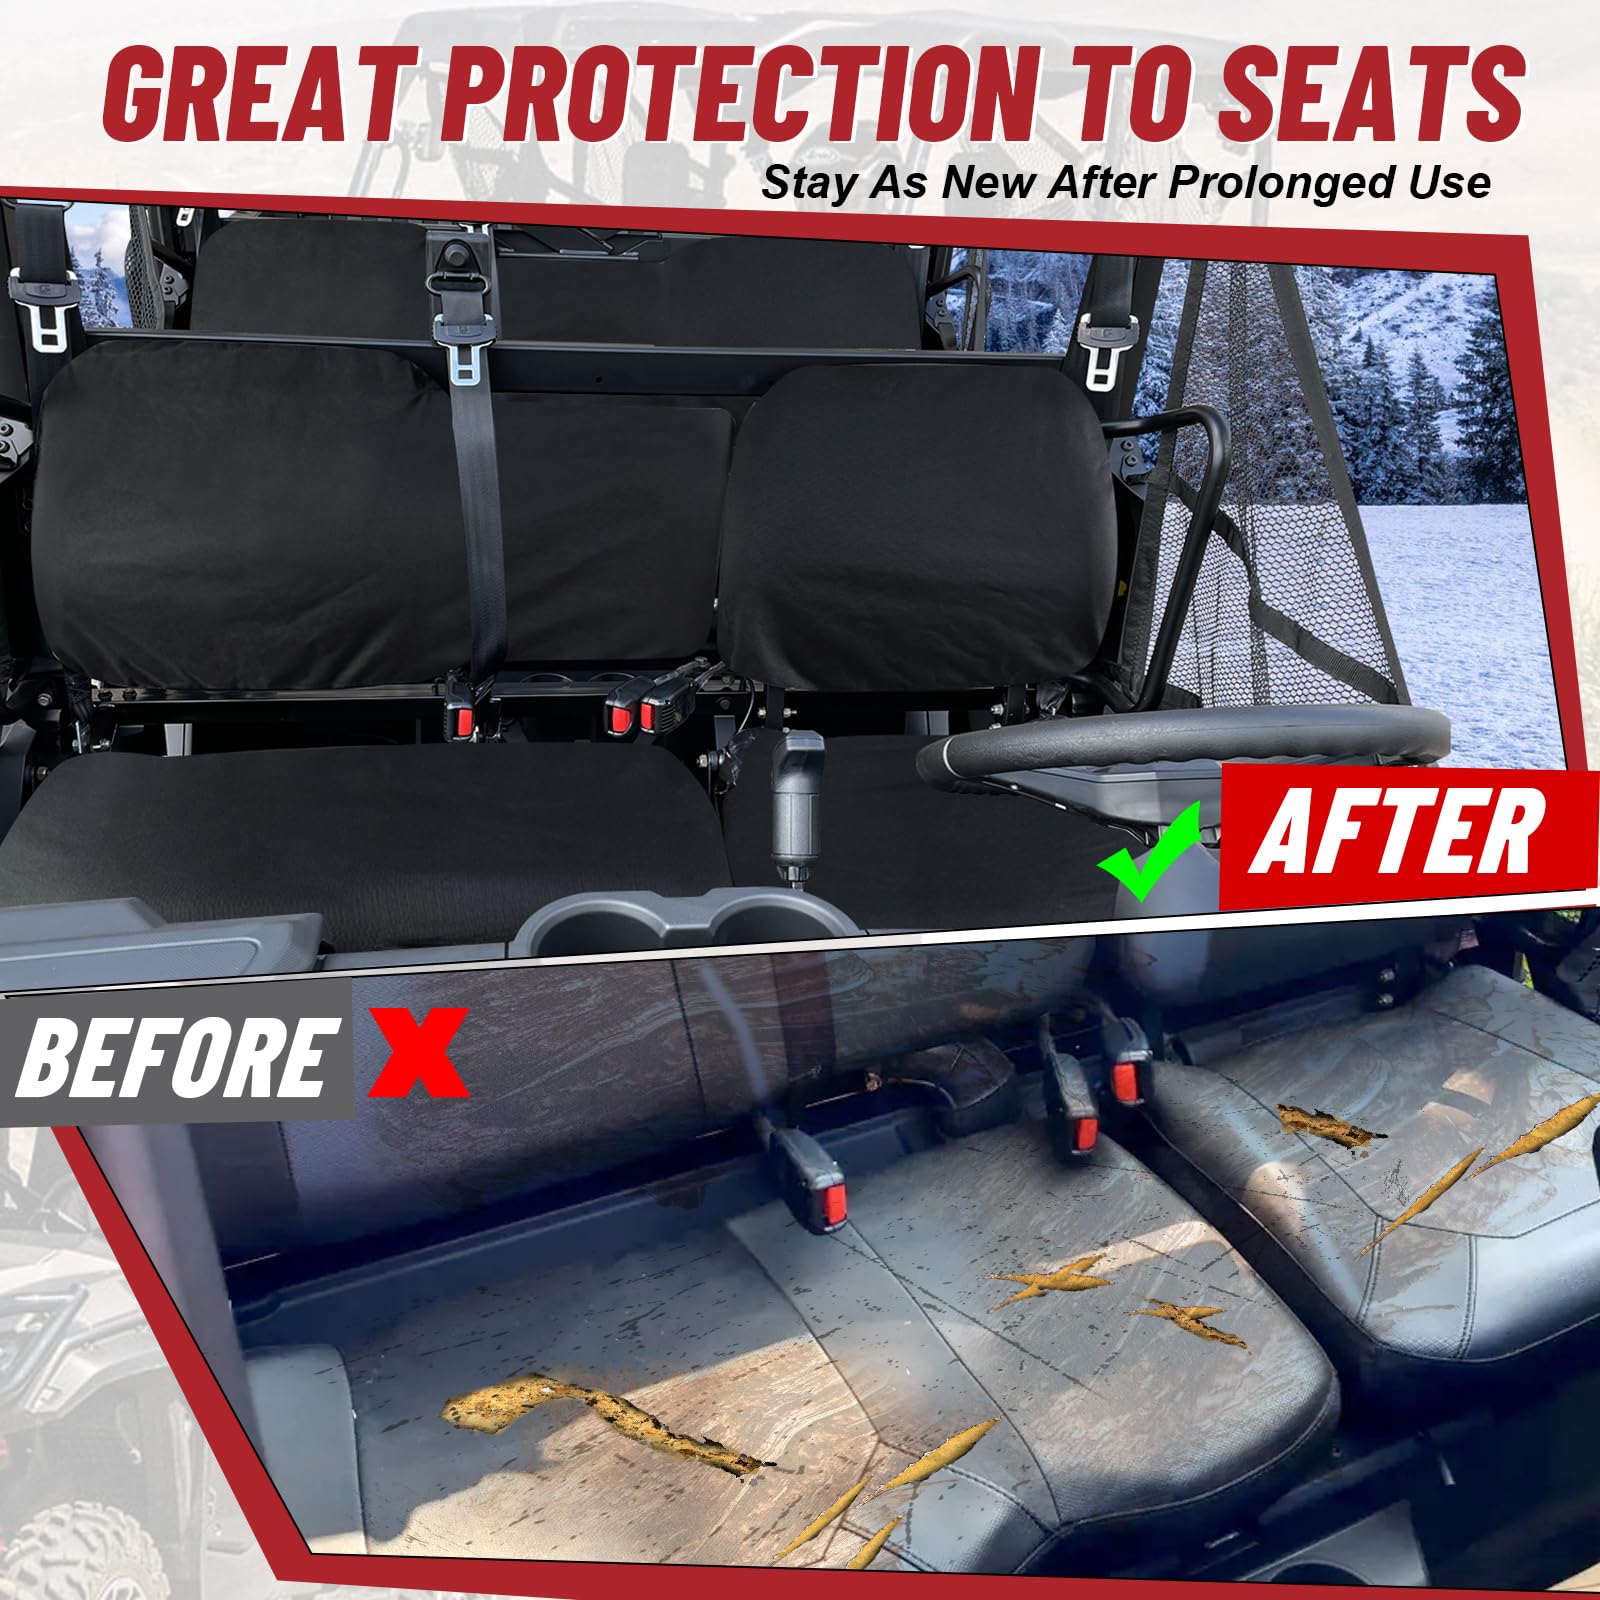 ranger crew xp 1000 seat cover set give a great protection